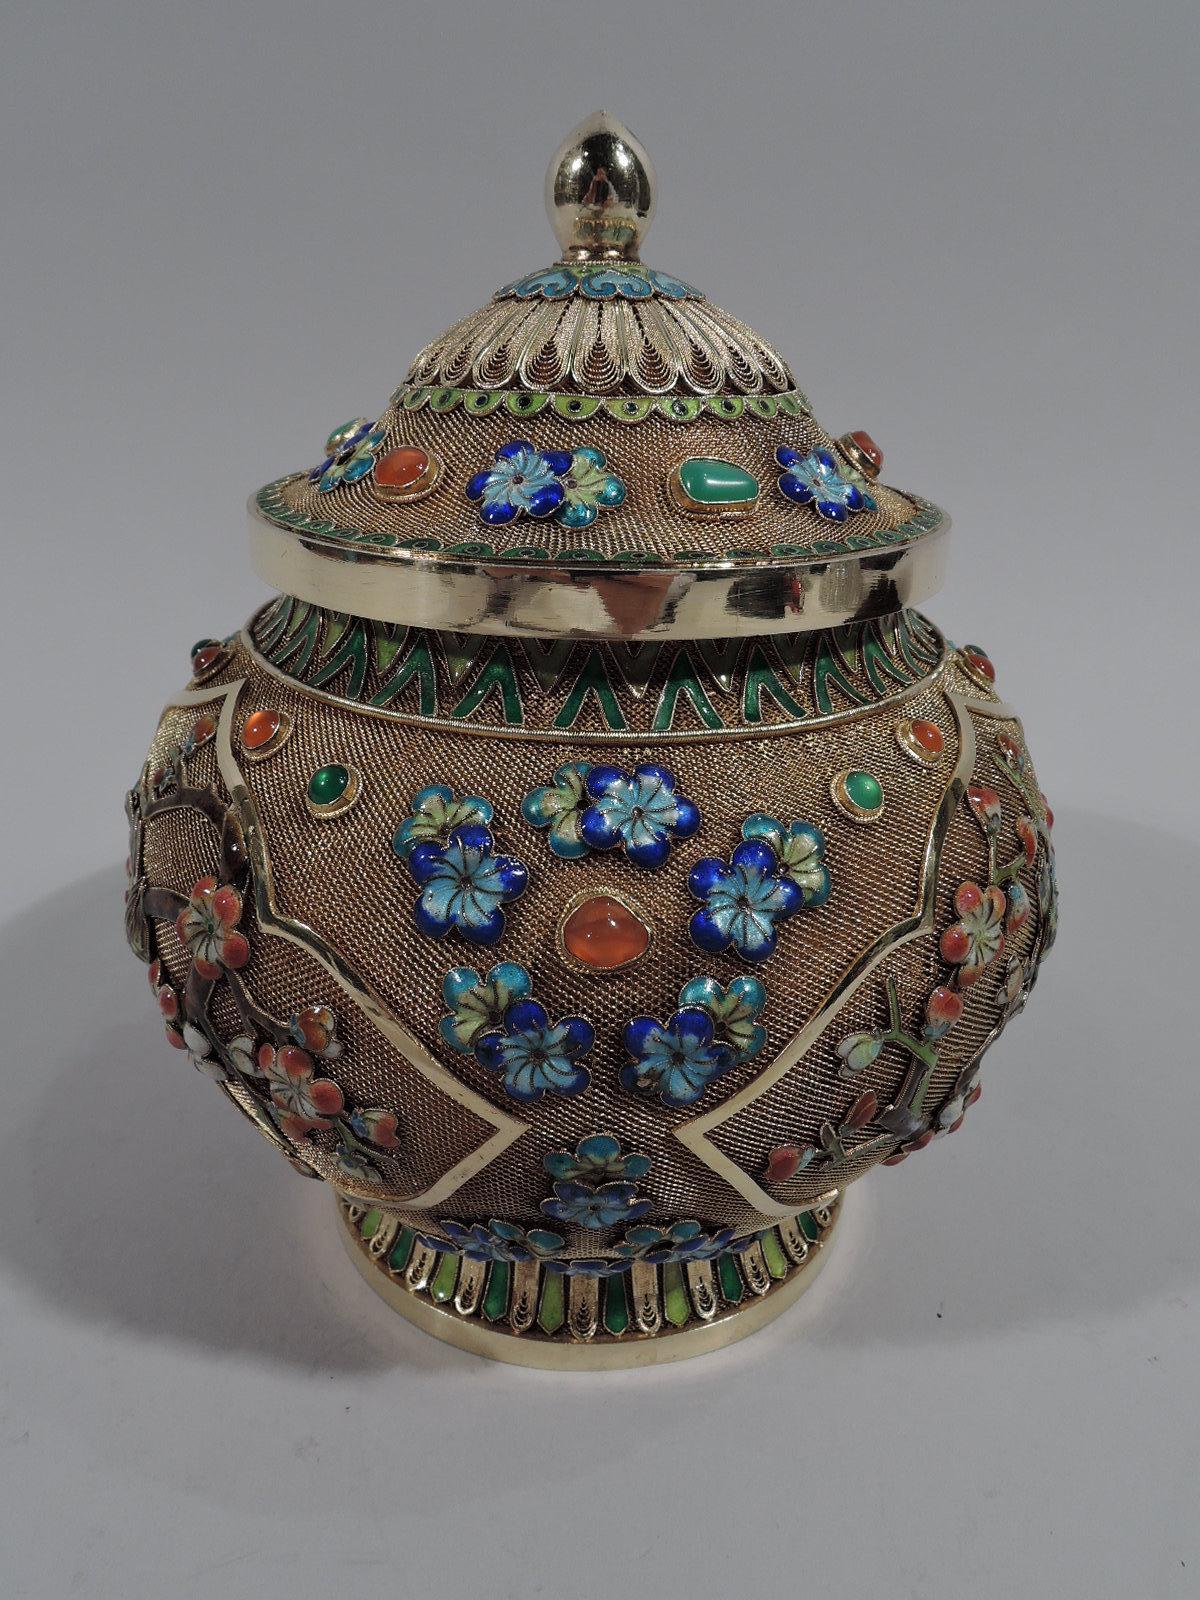 Fabulous Chinese silver gilt and enamel ginger jar, circa 1920. Globular with raised and spread foot and domed foot. Textured gilt ground with enameled ornament: Birds perched on blossoming prunus branches in shaped silver-gilt frames. Also, blue